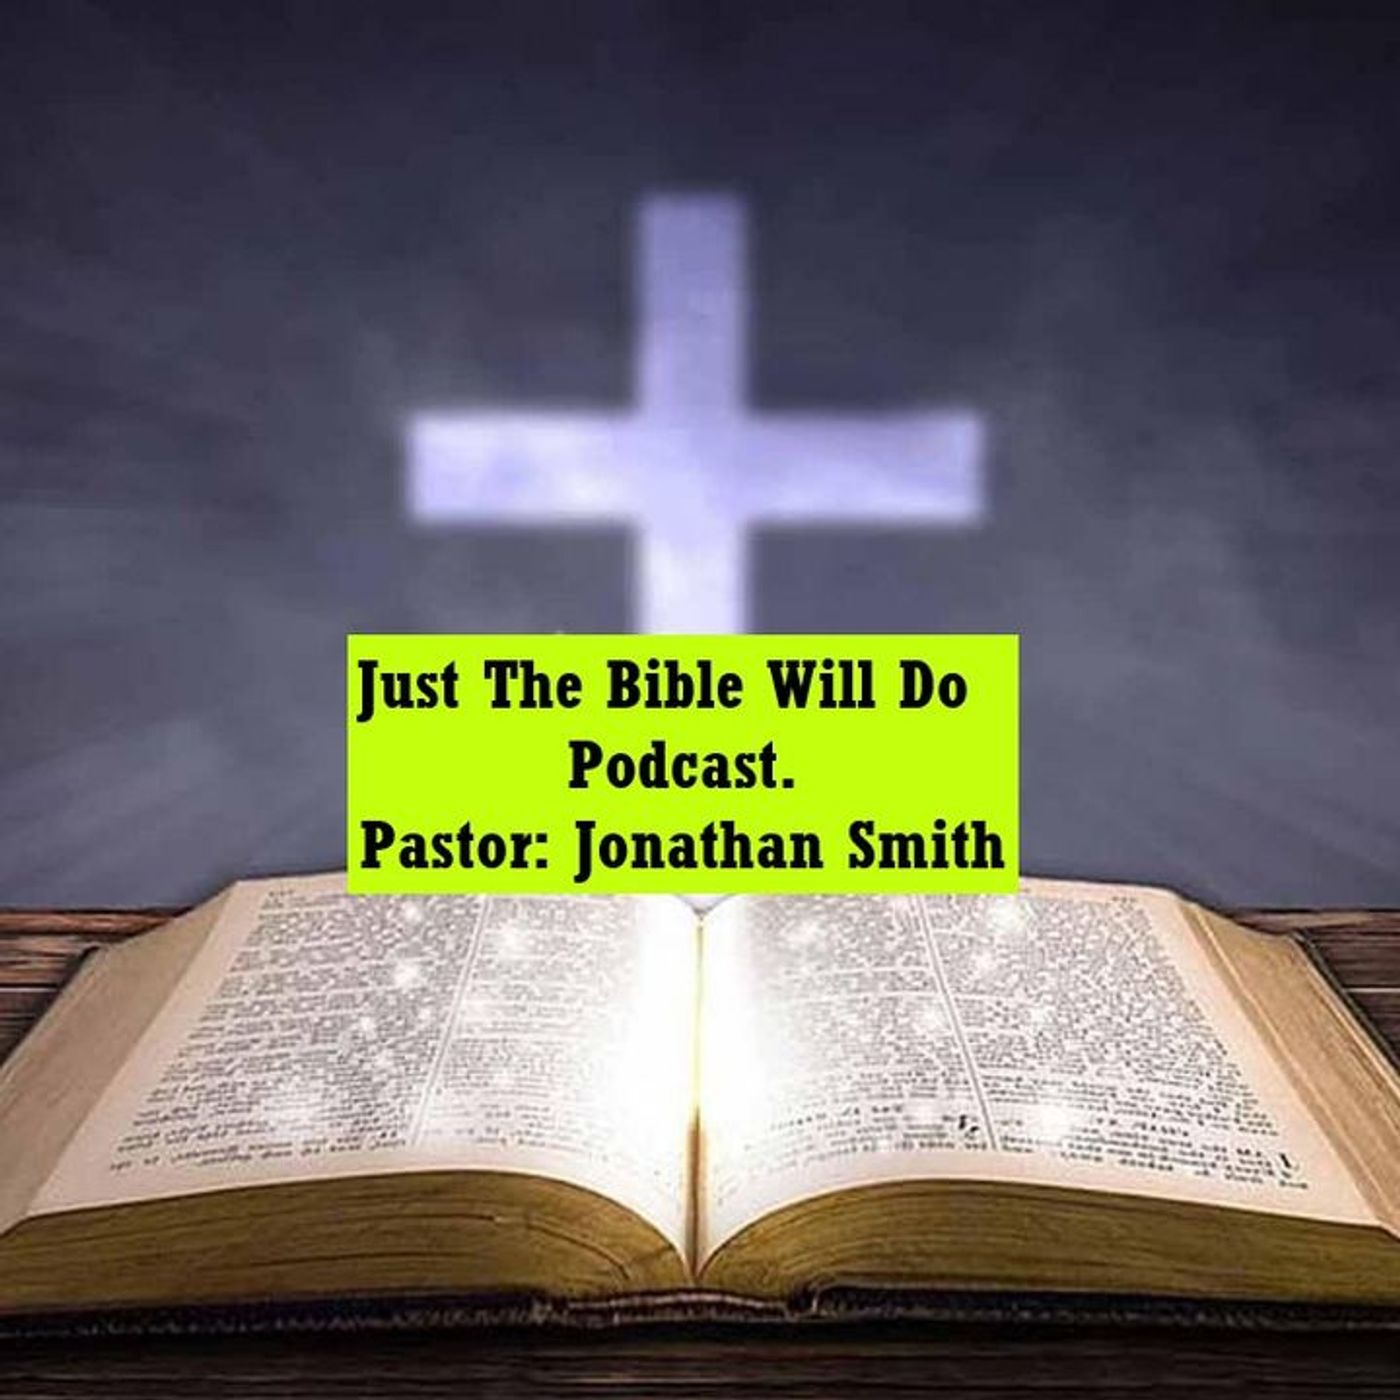 Just The Bible Will Do Podcast